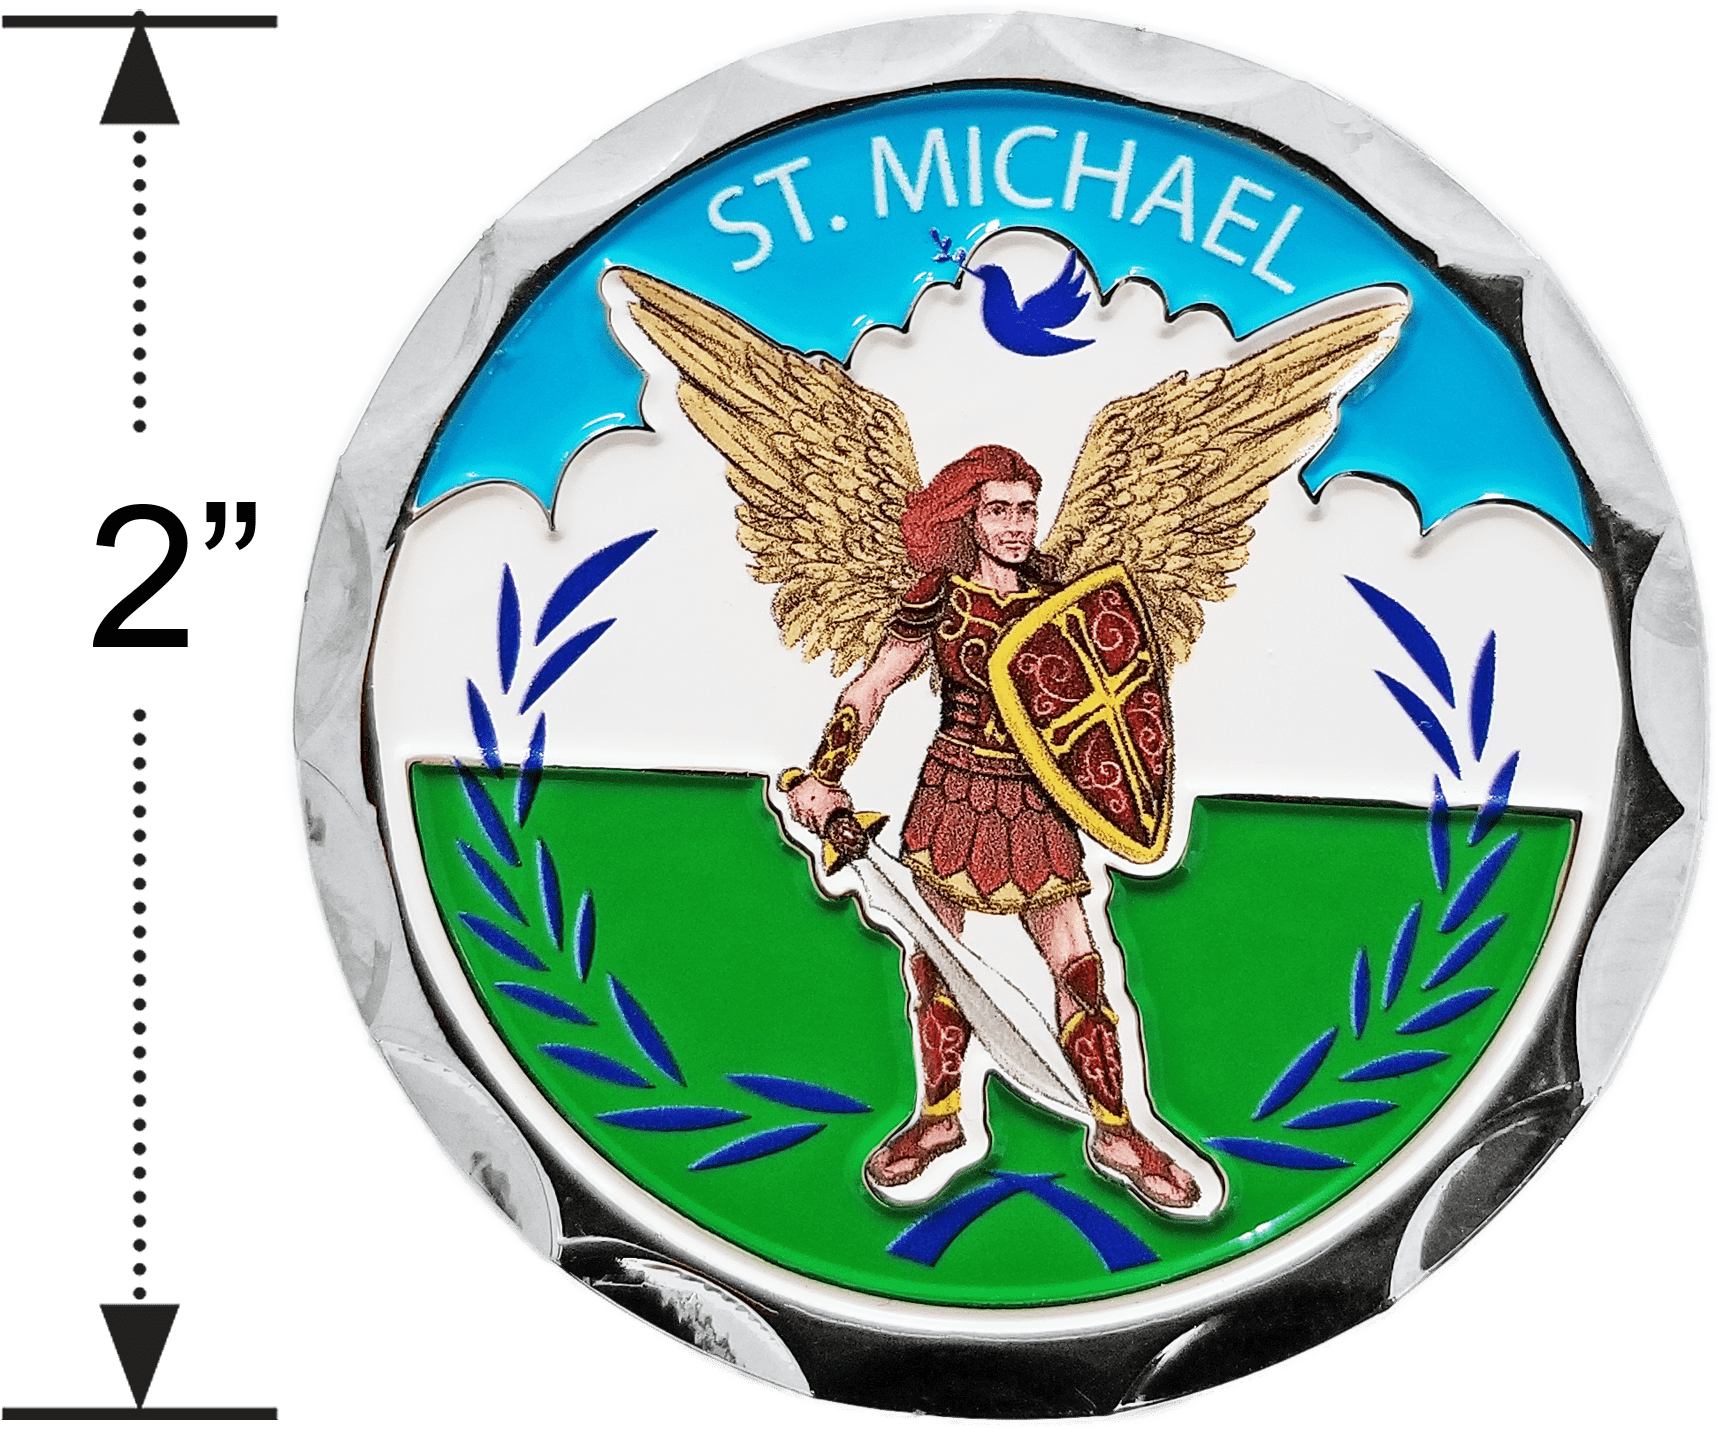 St. Michael Confirmation Coin - Psalm 91:10-11